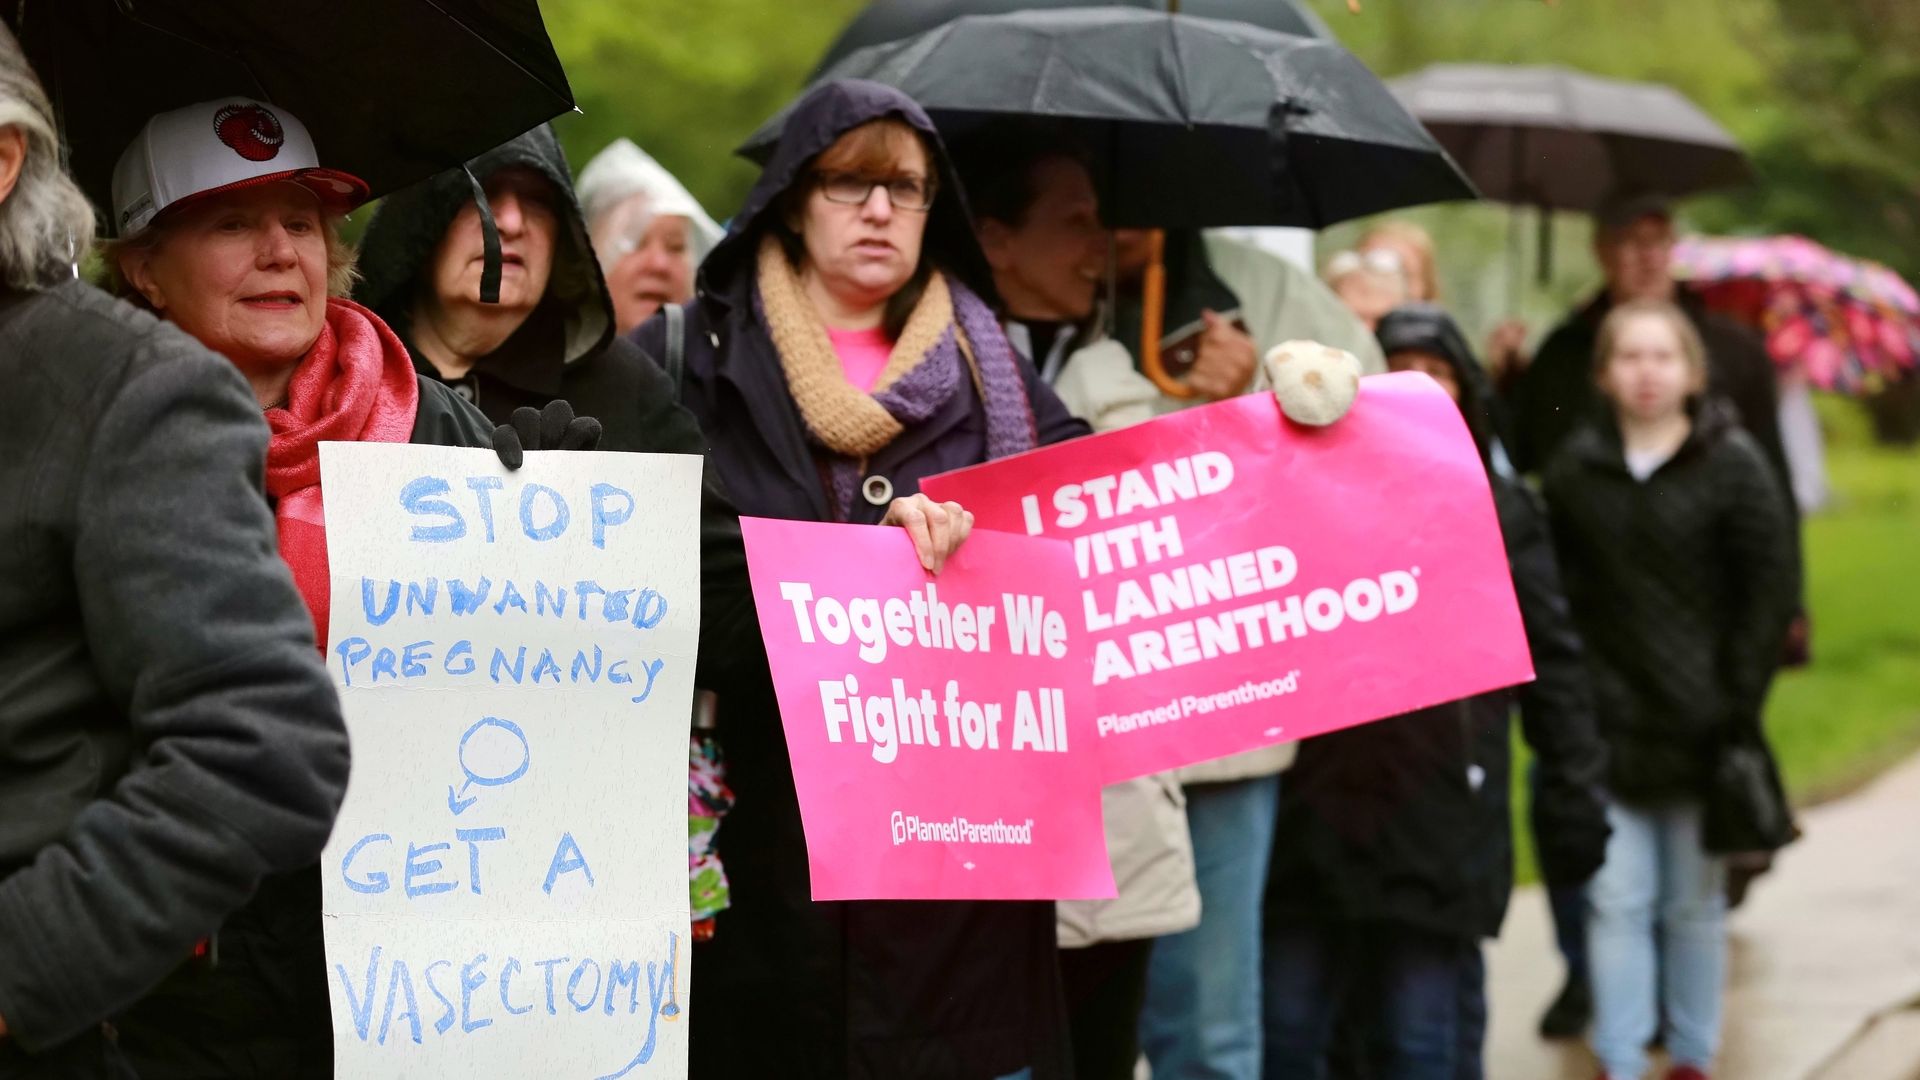 In this image, protestors stand with pro-abortion signs.